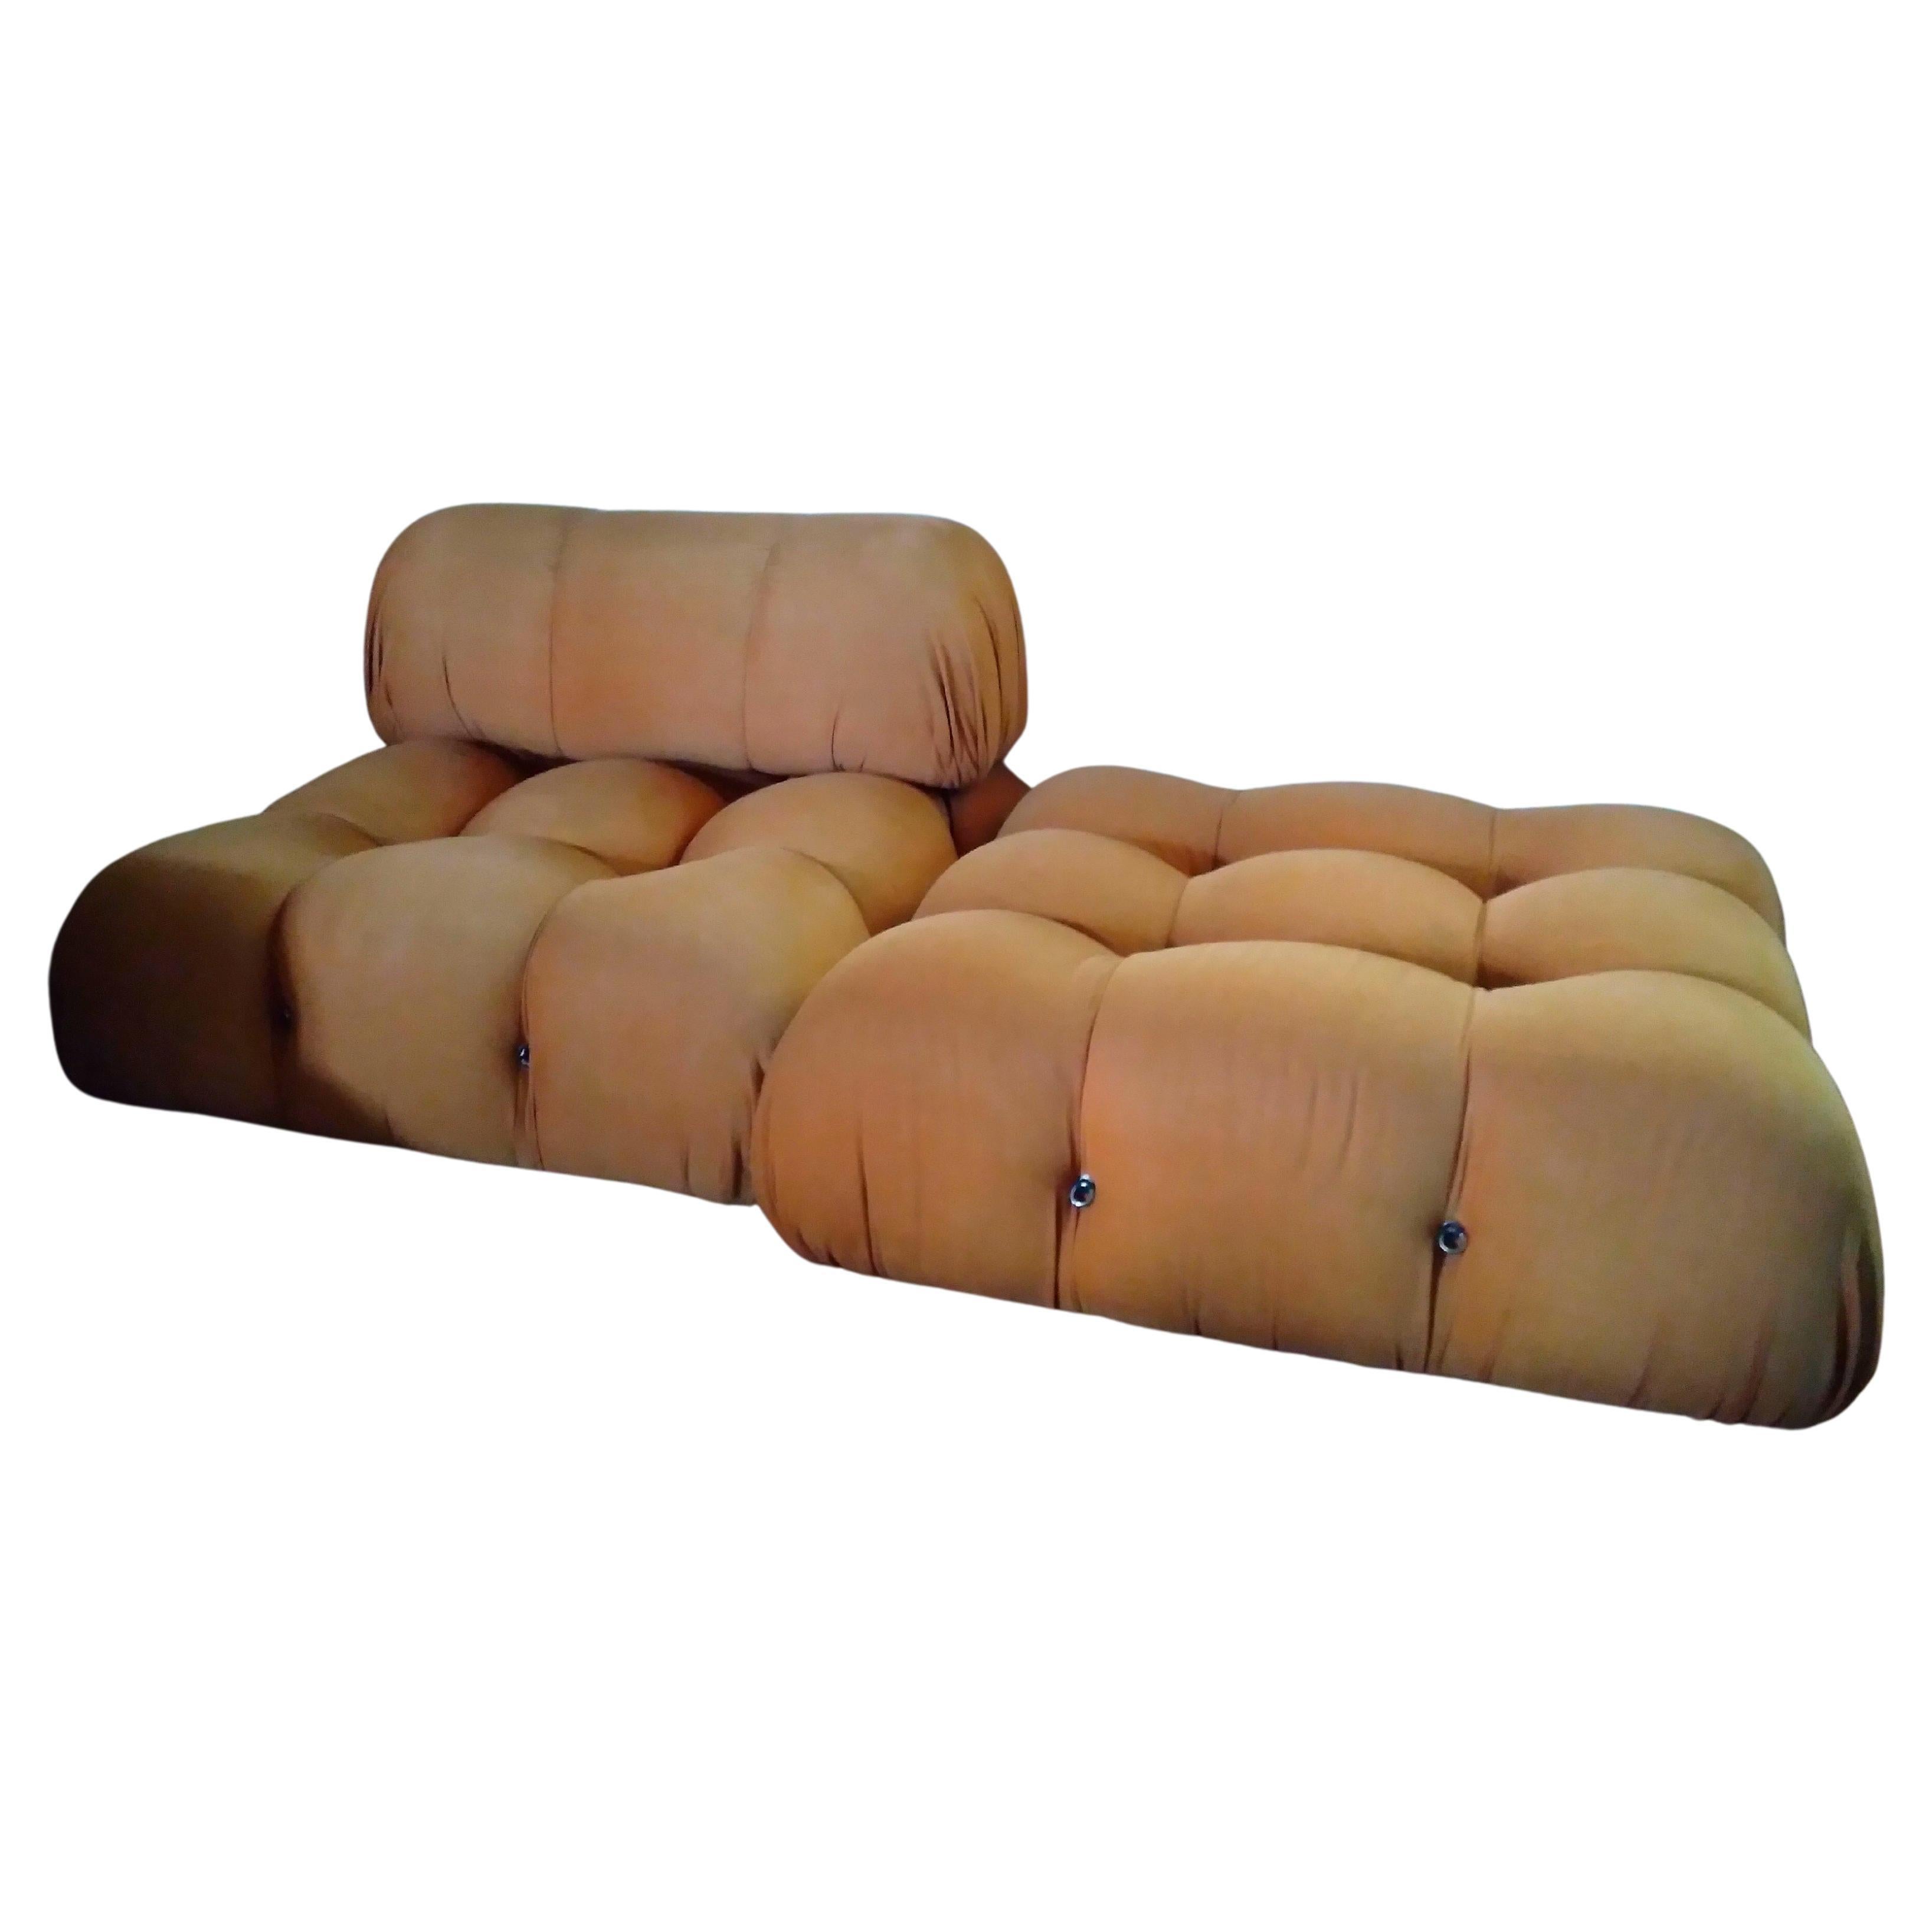 The Camaleonda Modular Sofa by Mario Bellini from C&B Italia  The first edition , fabric original , in very good state . Set of two large  seats
The Camaleonda is iconic sofa , the Camaleonda is exhibited at the  Moma Museum of  NewYork .
I's very